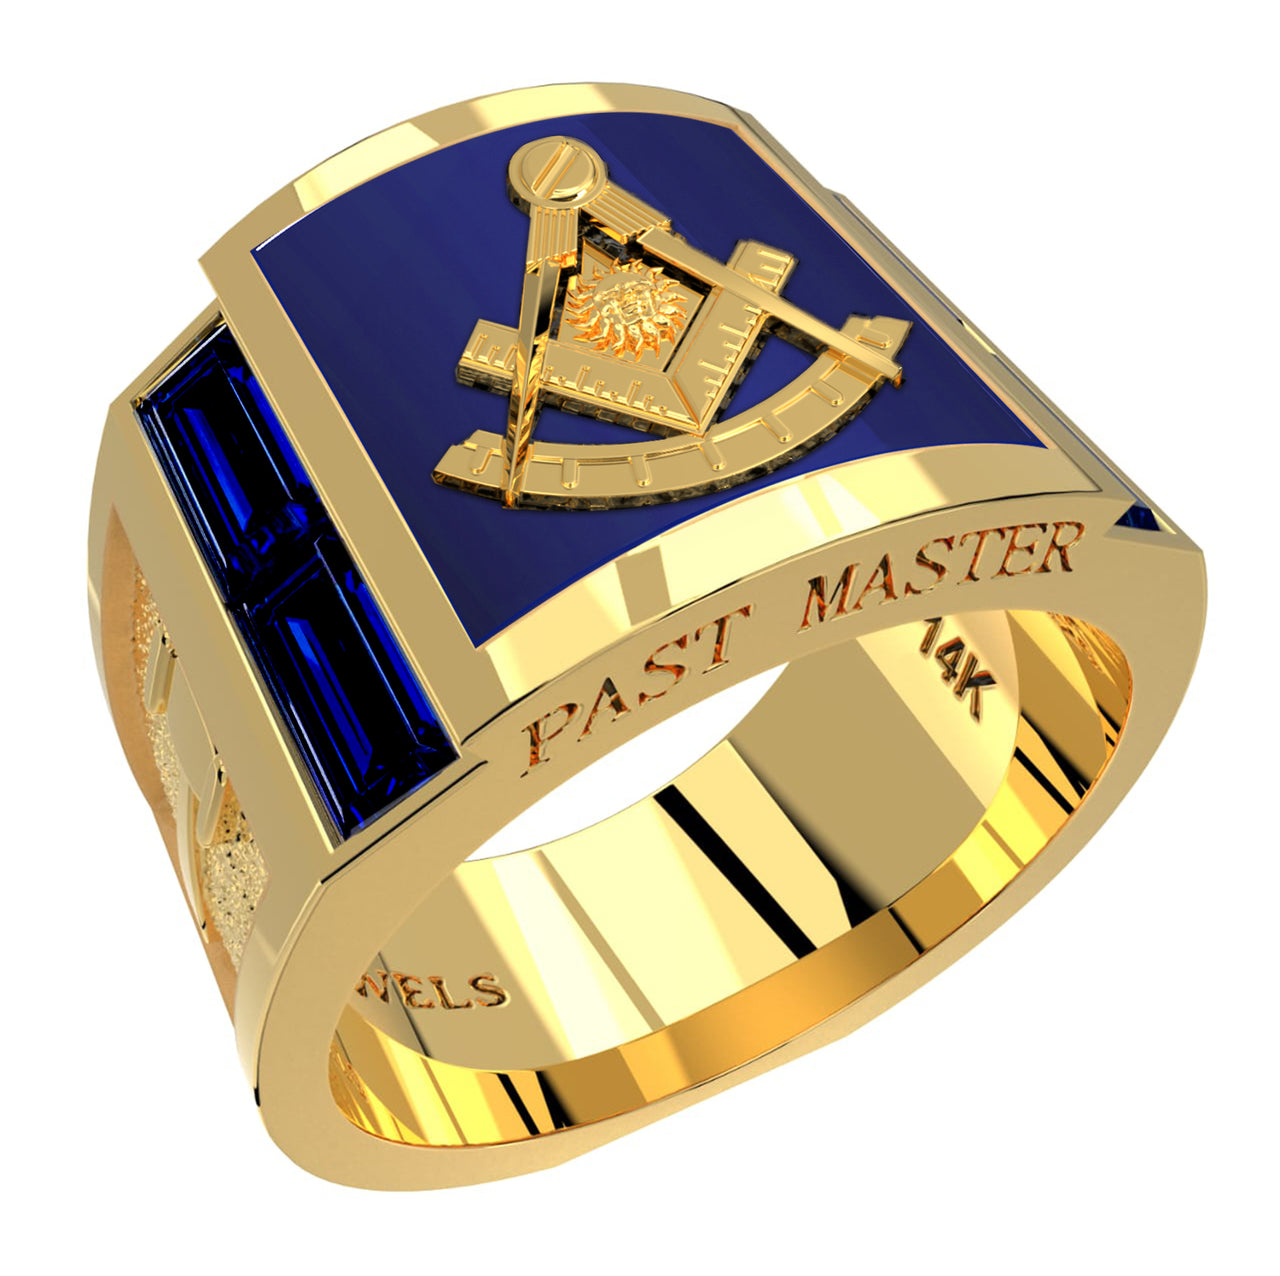 Men's Heavy Solid 10K or 14K Yellow or White Gold Past Master Ring Band with Blue Lapis